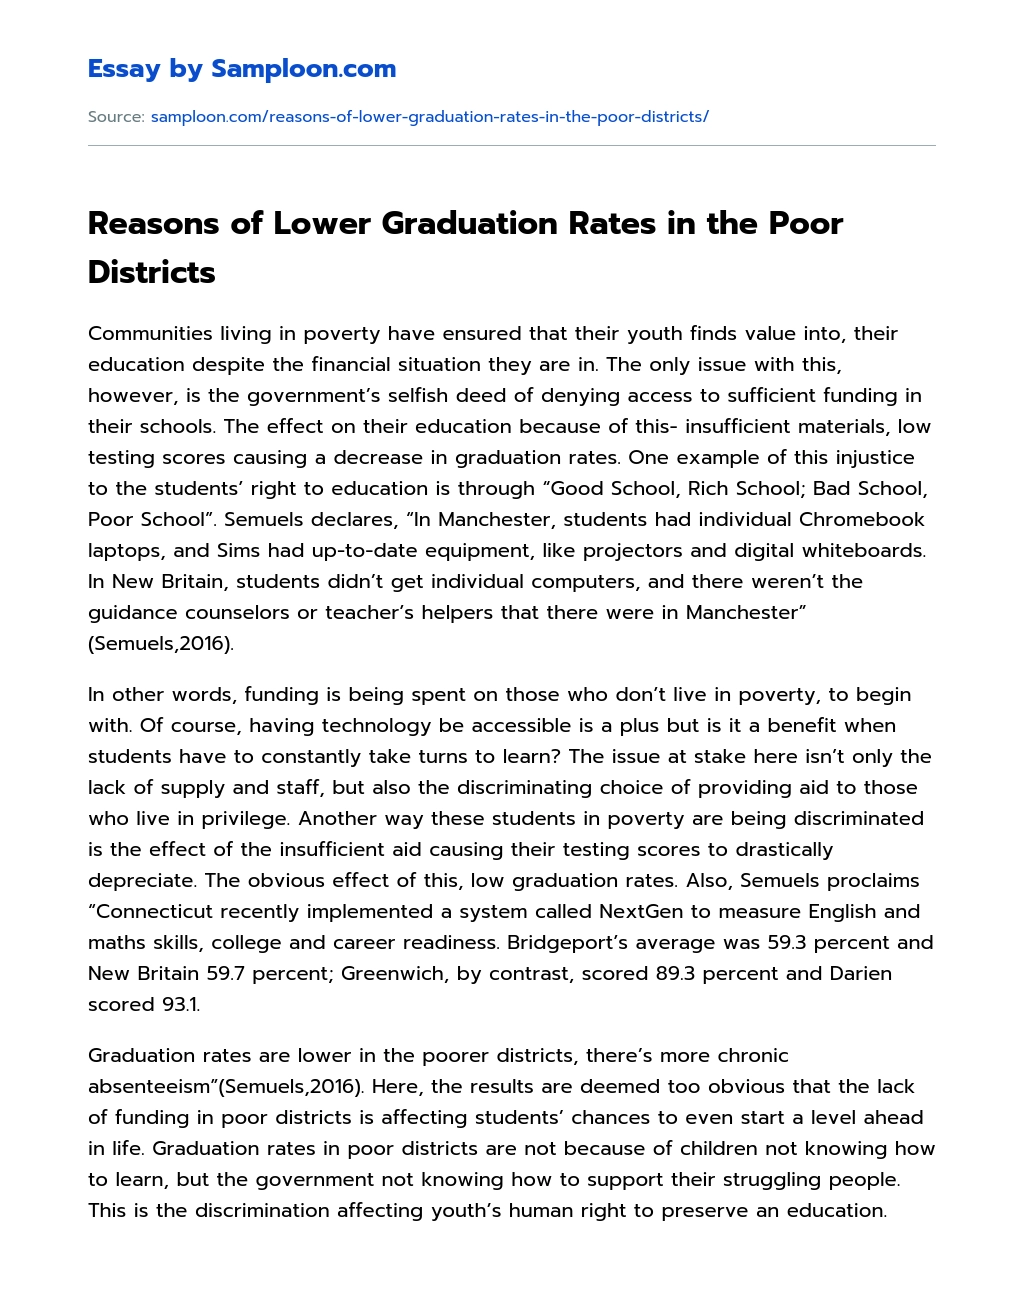 Reasons of Lower Graduation Rates in the Poor Districts essay